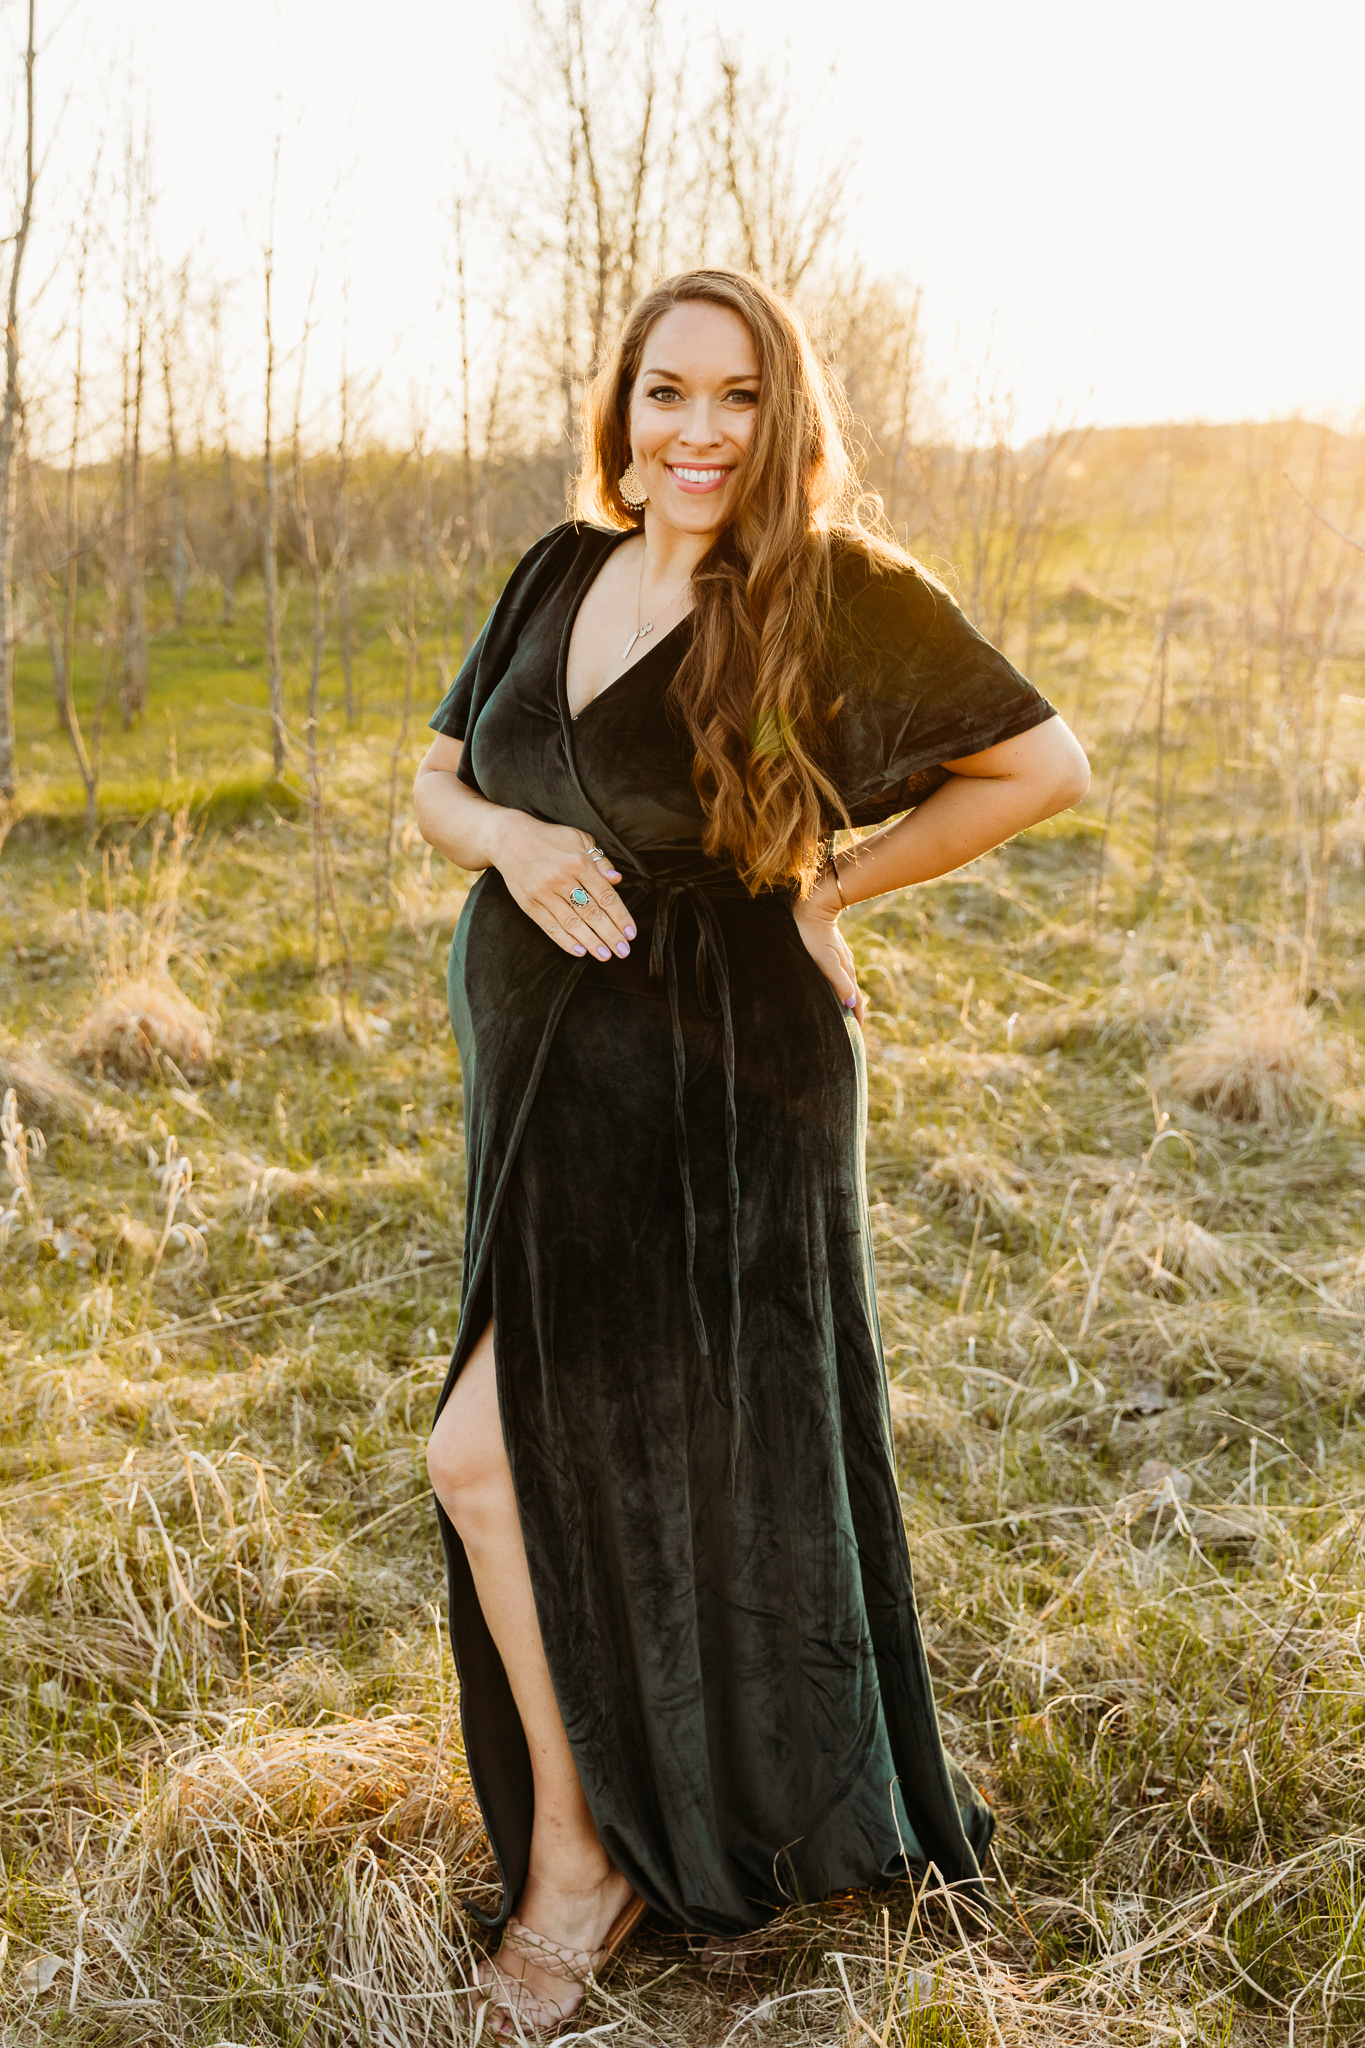 A mother to be in a green velvet maternity dress stands in a field with a hand on her back Milwaukee yoga studios